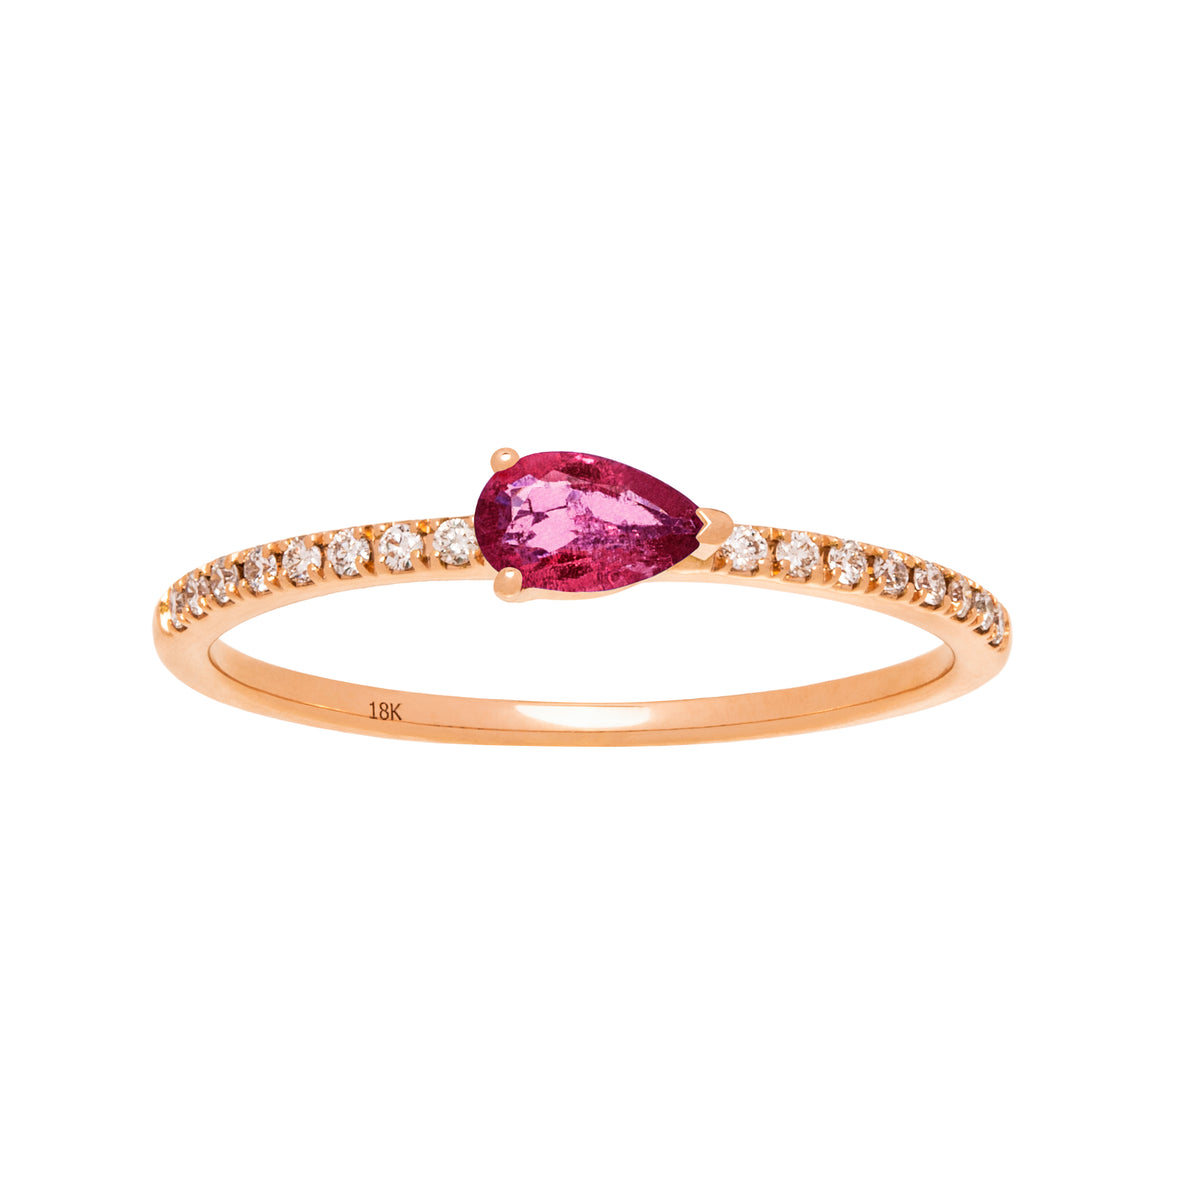 Ruby Ring. Diamond and Ruby ring. Gift ring. Gold ring. Diamond ring. Precious stone ring. High end ring. Anatol jewelry. Fine jewelry. Golden Hall. Kifissia. Step cut ring. Red Ruby. Fine jewelry. Ring. Engagement ring. Athens. Δαχτυλίδι με ρουμπίνι και διαμάντια. Δαχτυλίδι με κόκκινο ρουμπίνι και μπριγιάν.